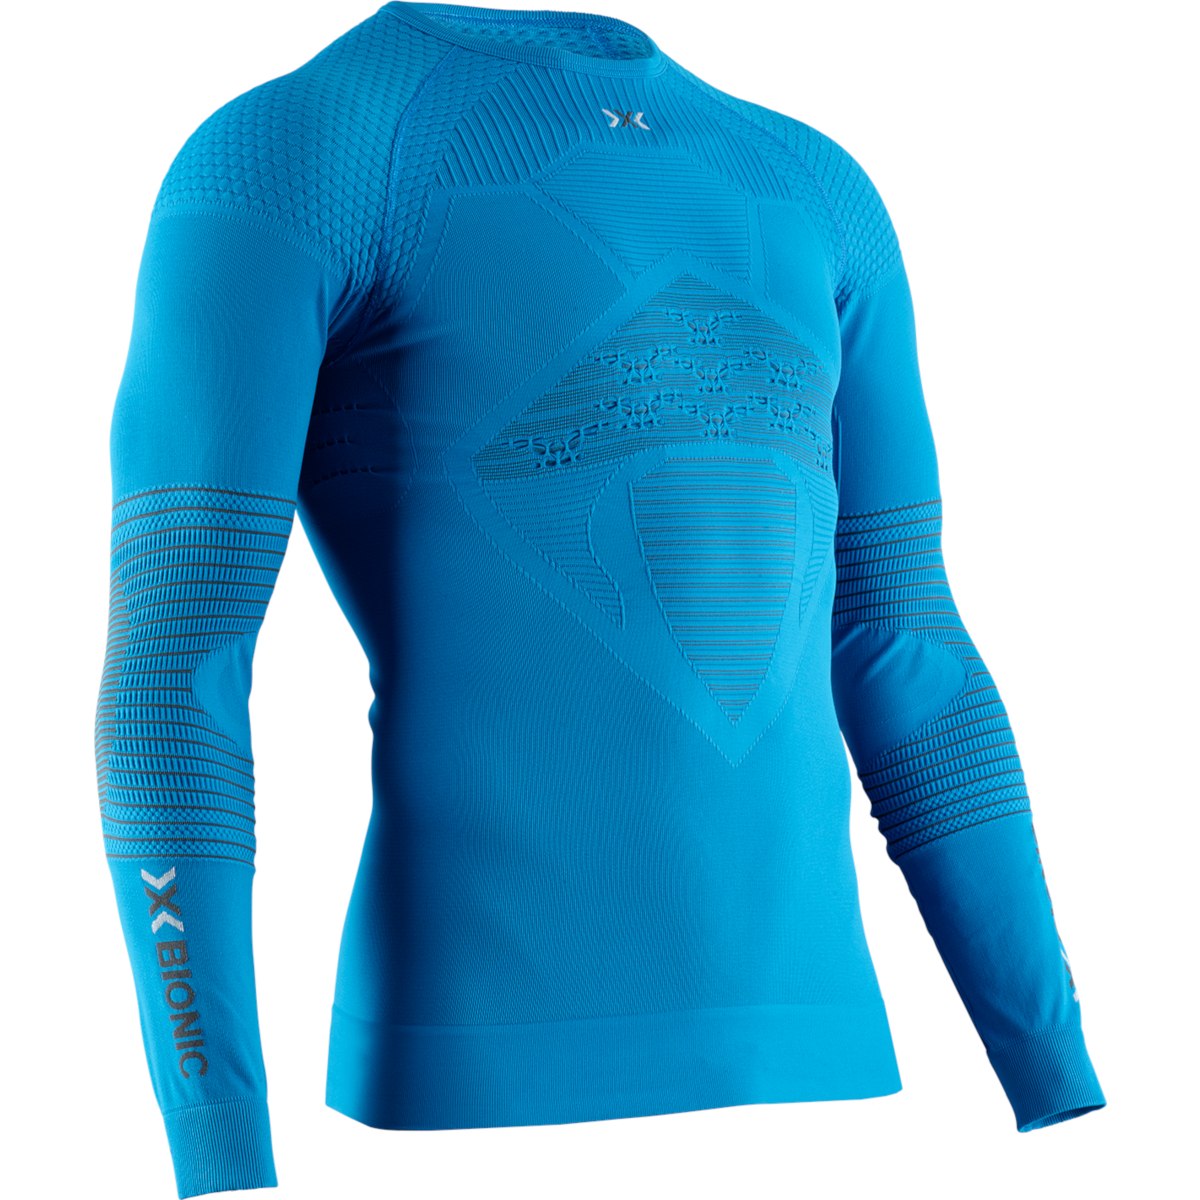 Picture of X-Bionic Energizer 4.0 Round Neck Long Sleeves Shirt Men - teal blue/anthracite